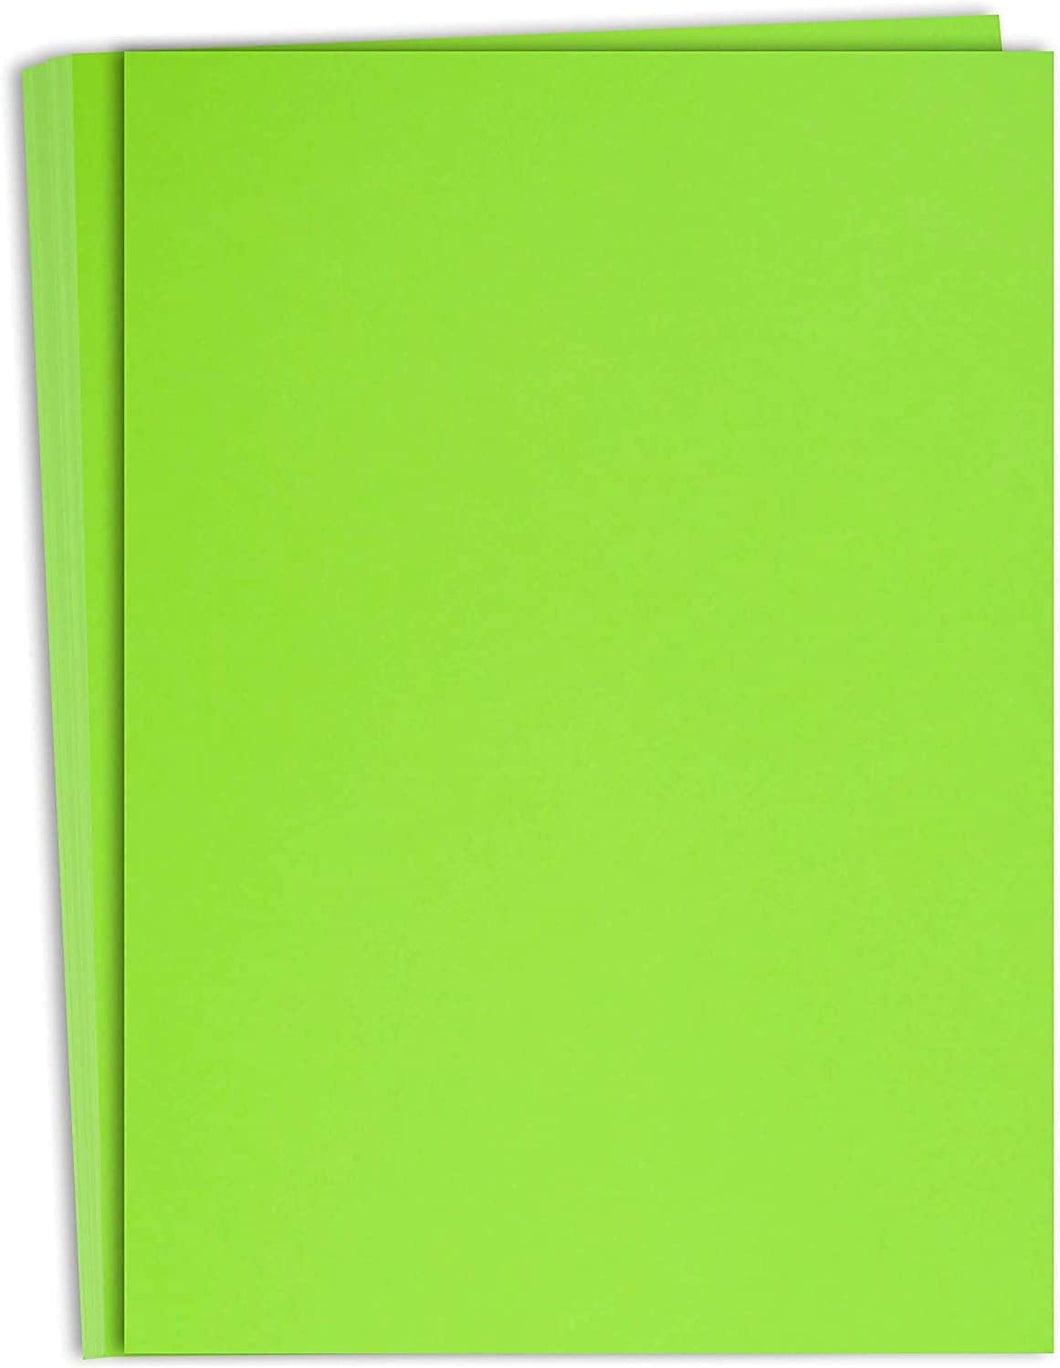 Hamilco Colored Cardstock Paper 11 x 17 Lime Green Color Card